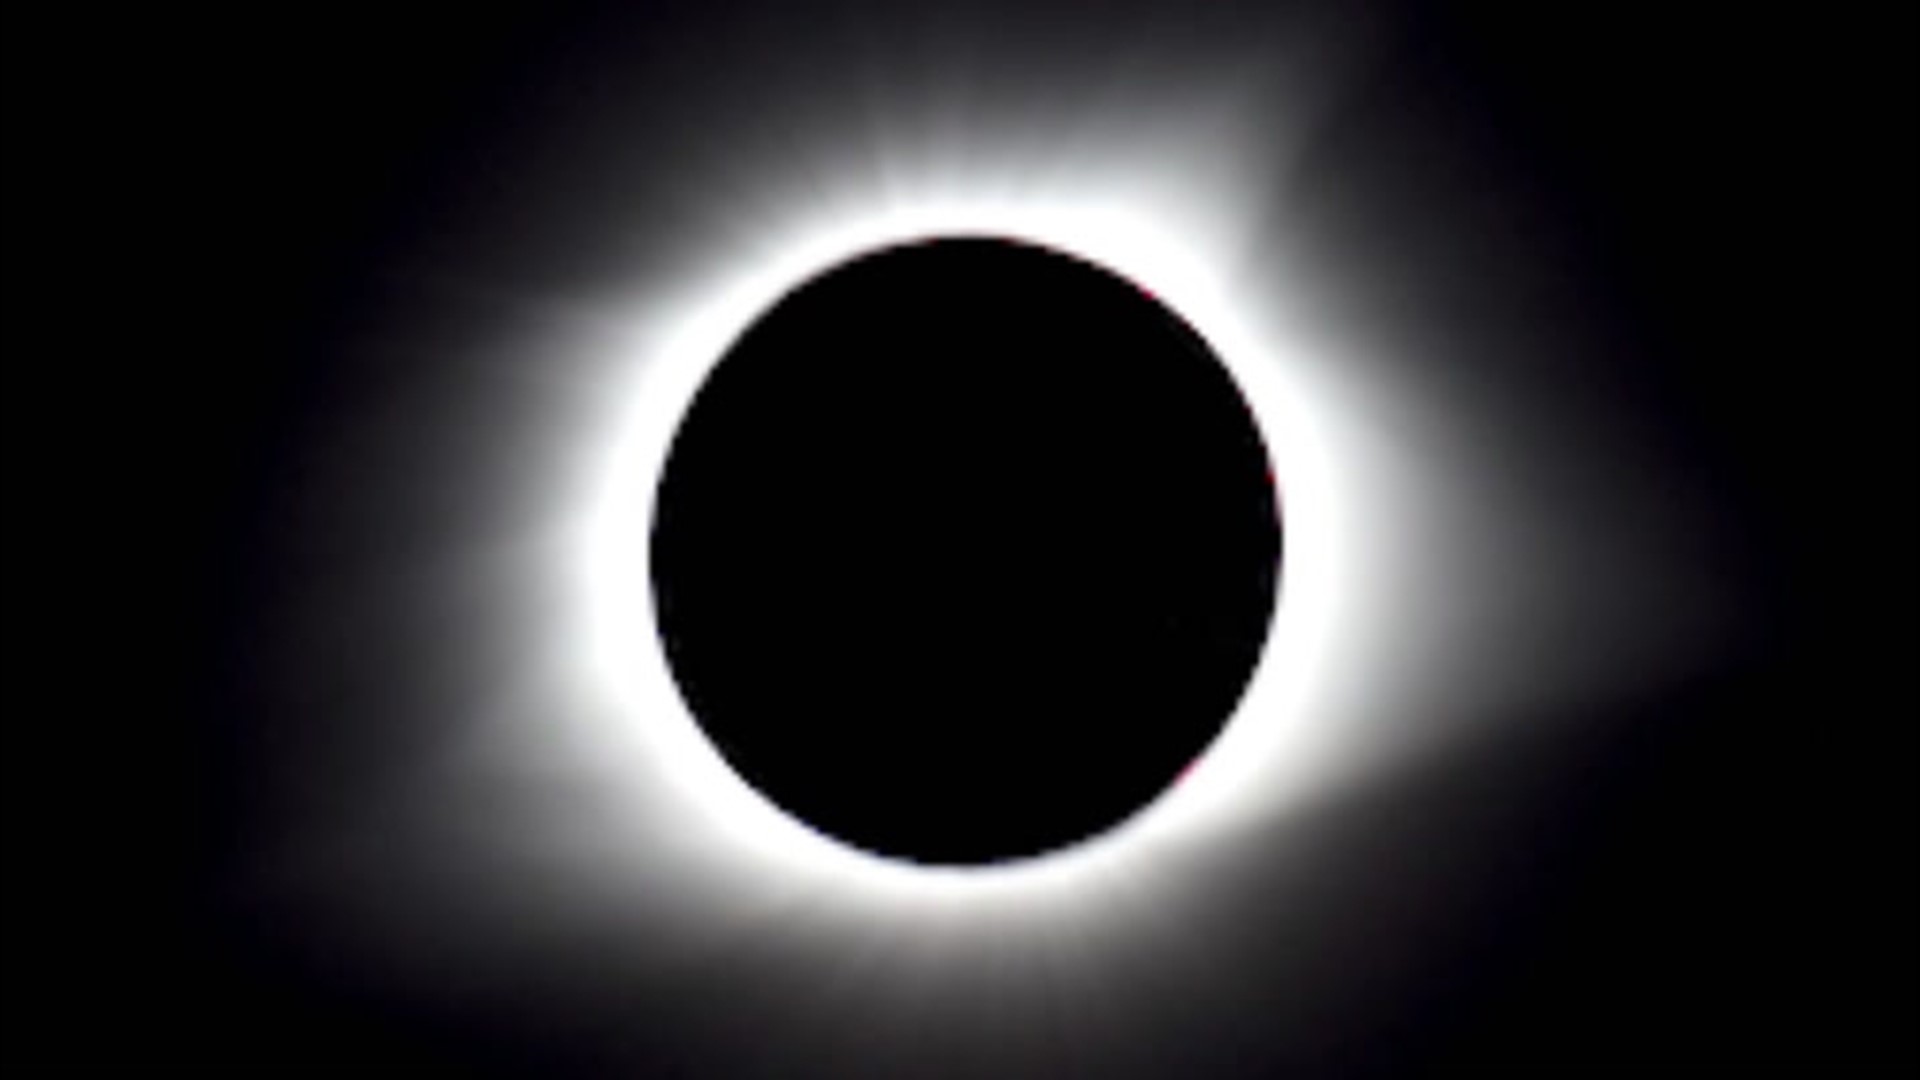 On April 8, 2024, the Earth, Moon and Sun will align perfectly to create a total solar eclipse over North America, the first for many since the eclipse on Aug. 21, 2017.